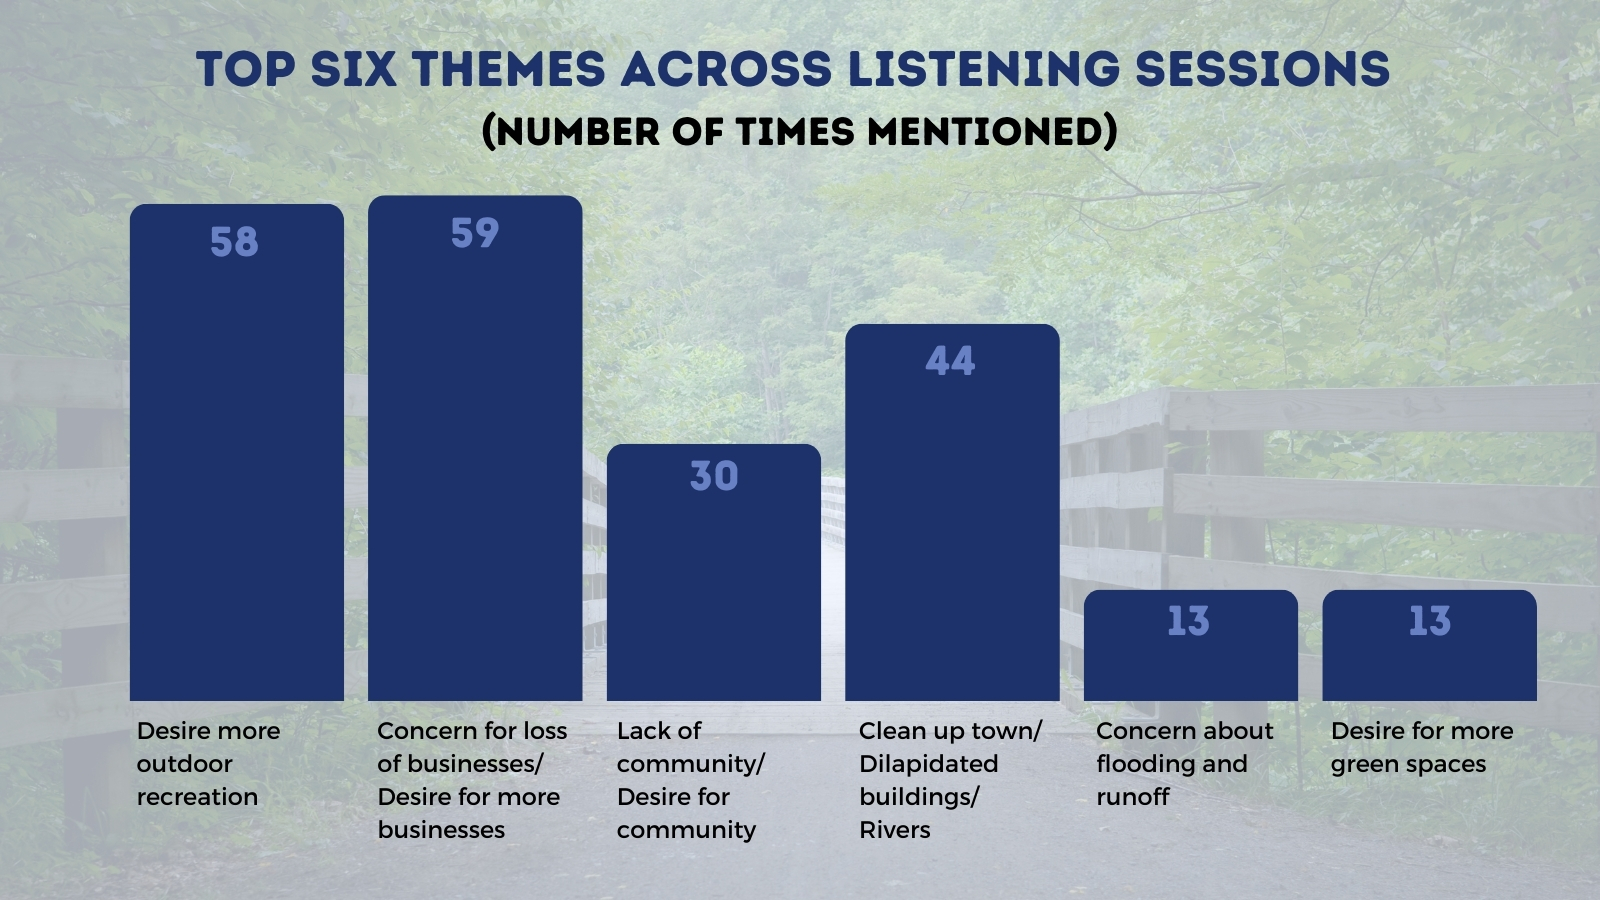 Top six themes across listening sessions: 58 times “desire more outdoor recreation” was mentioned 59 times “concern for loss of businesses / desire for more businesses” was mentioned 30 times “lack of community / desire for more community” was mentioned 44 times “clean up town / dilapidated buildings or rivers” was mentioned 13 times “concern about flooding and runoff” was mentioned 13 times “desire for more greenspace” was mentioned